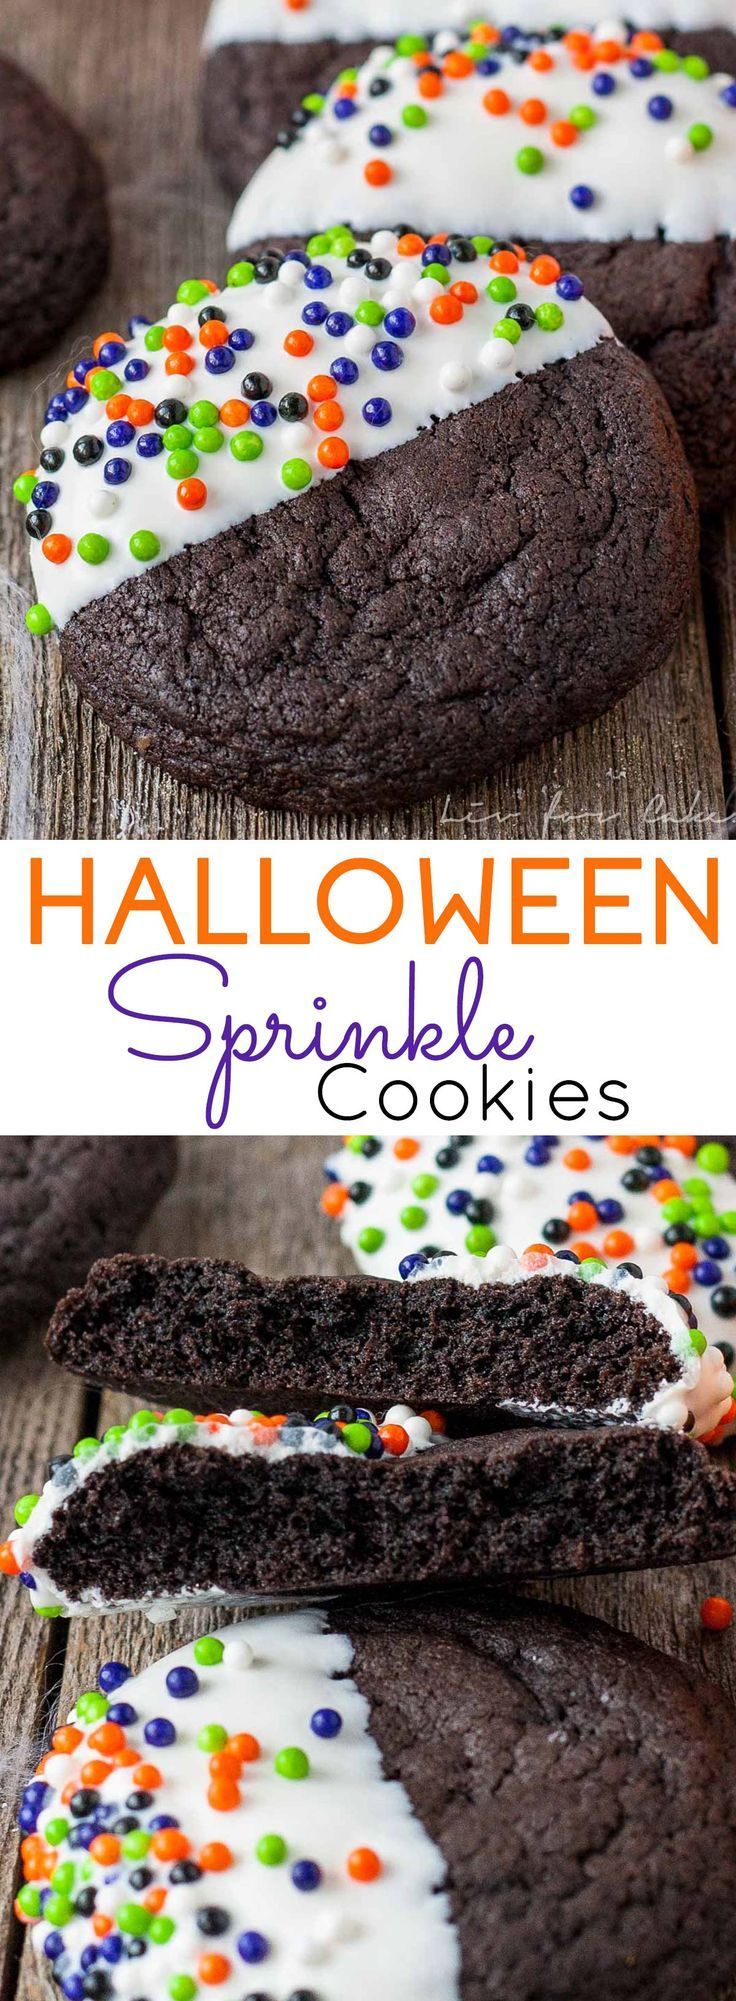 These easy Halloween Sprinkle Cookies are the perfect addition to your Halloween festivities! | livforcake.com -   23 halloween cookie recipes
 ideas